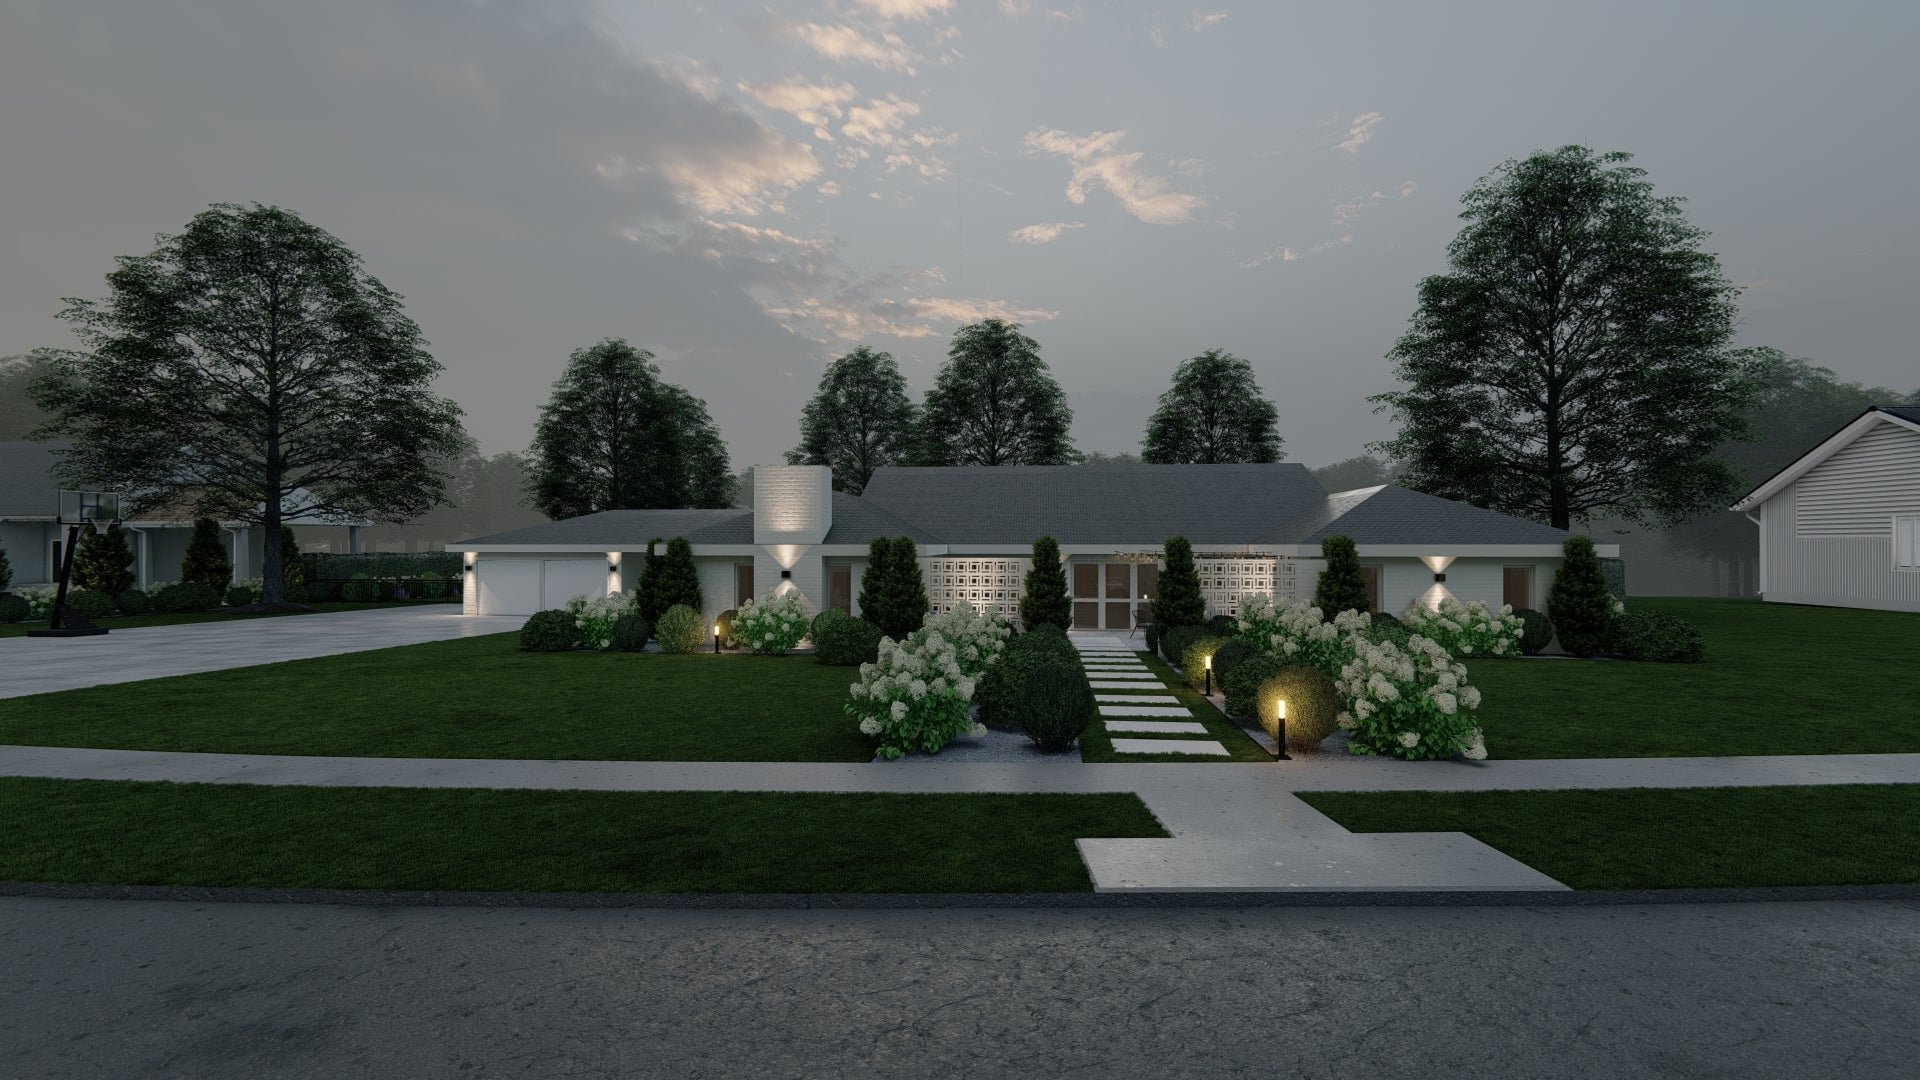 Evenly spaced wall and path lights pull the eye to the front entrance while boosting curb appeal.